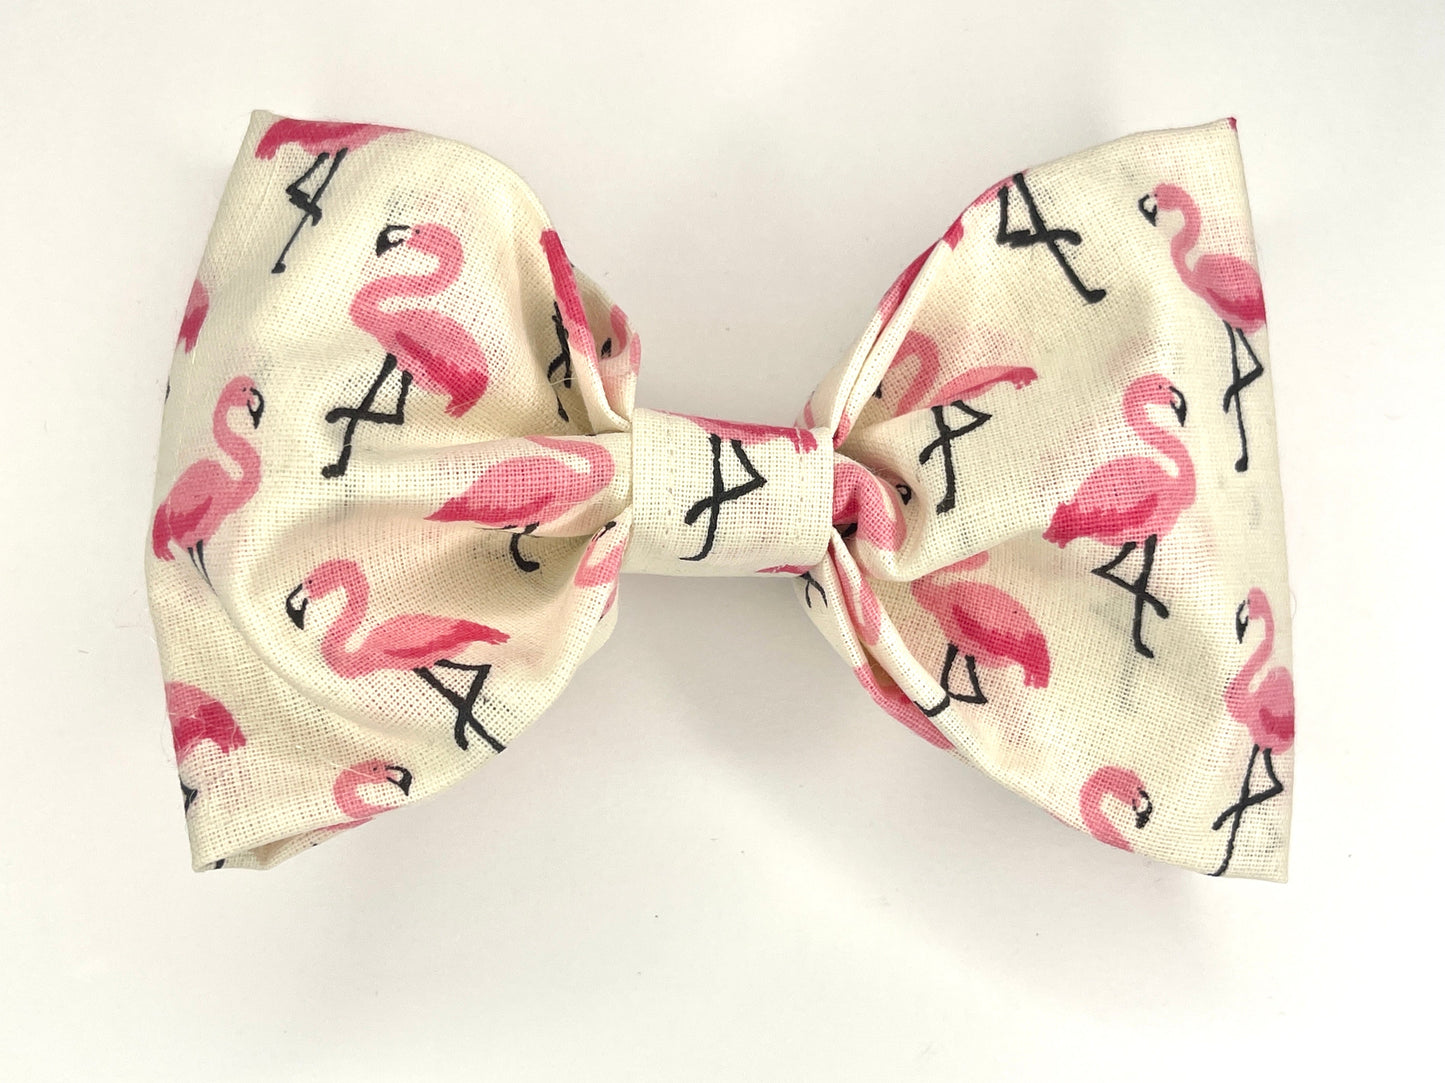 Let's Flamingle Bow Tie